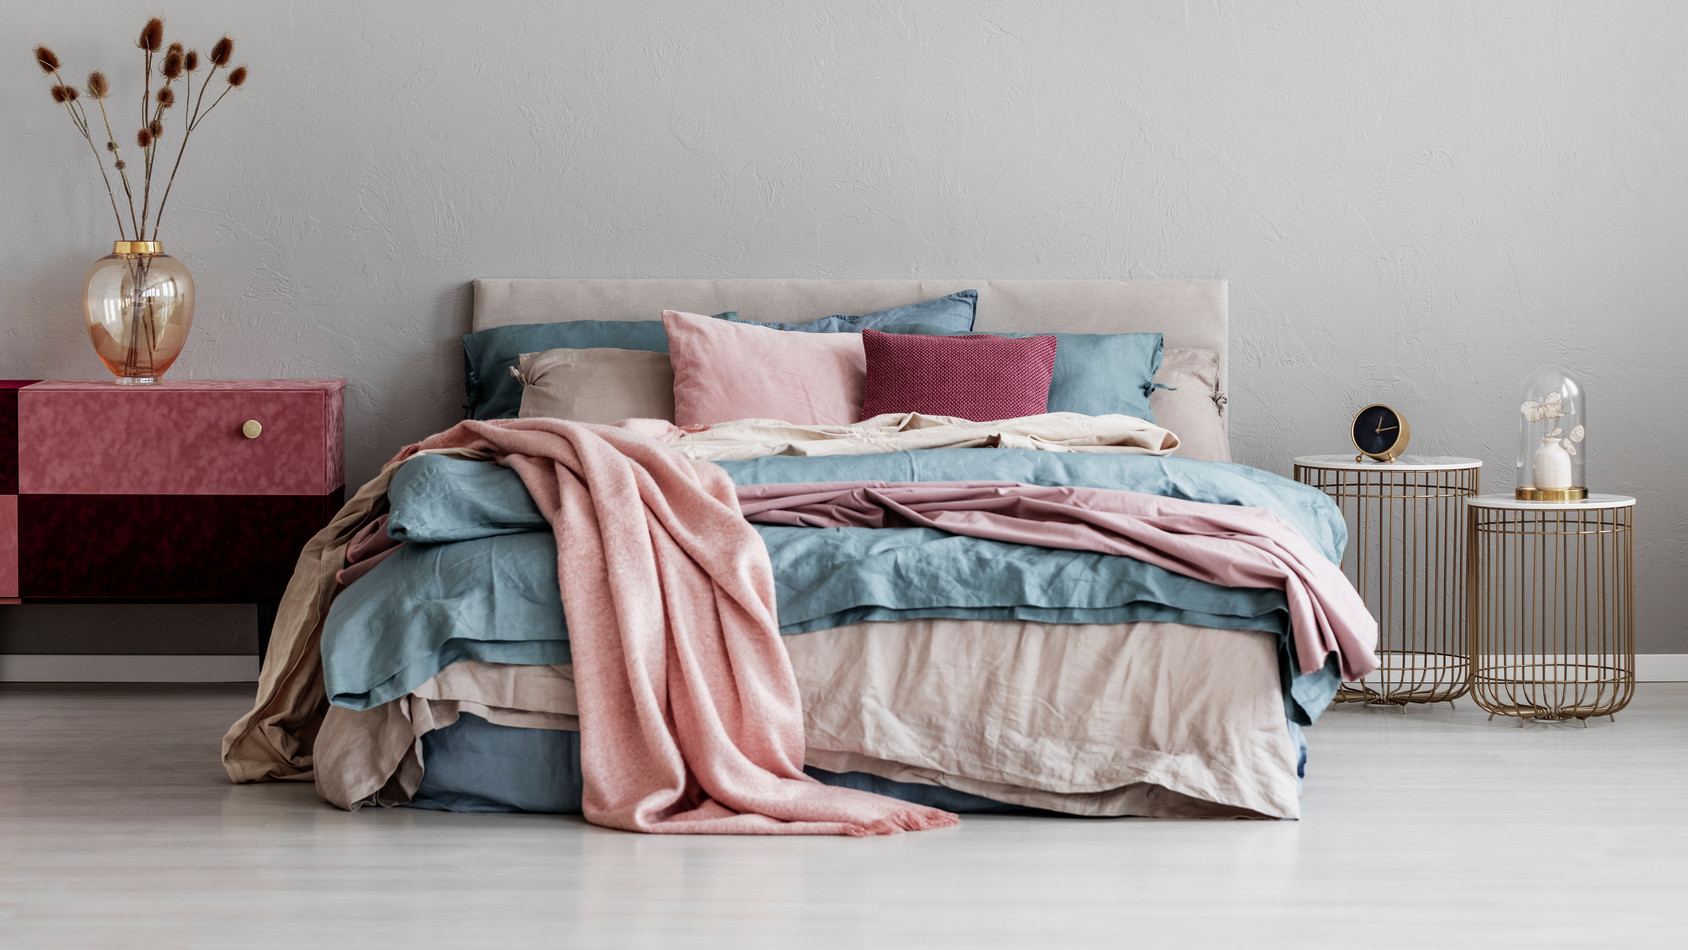 Pastel pink, beige and blue bedding on king size bed in trendy bedroom interior, copy space on empty grey wall